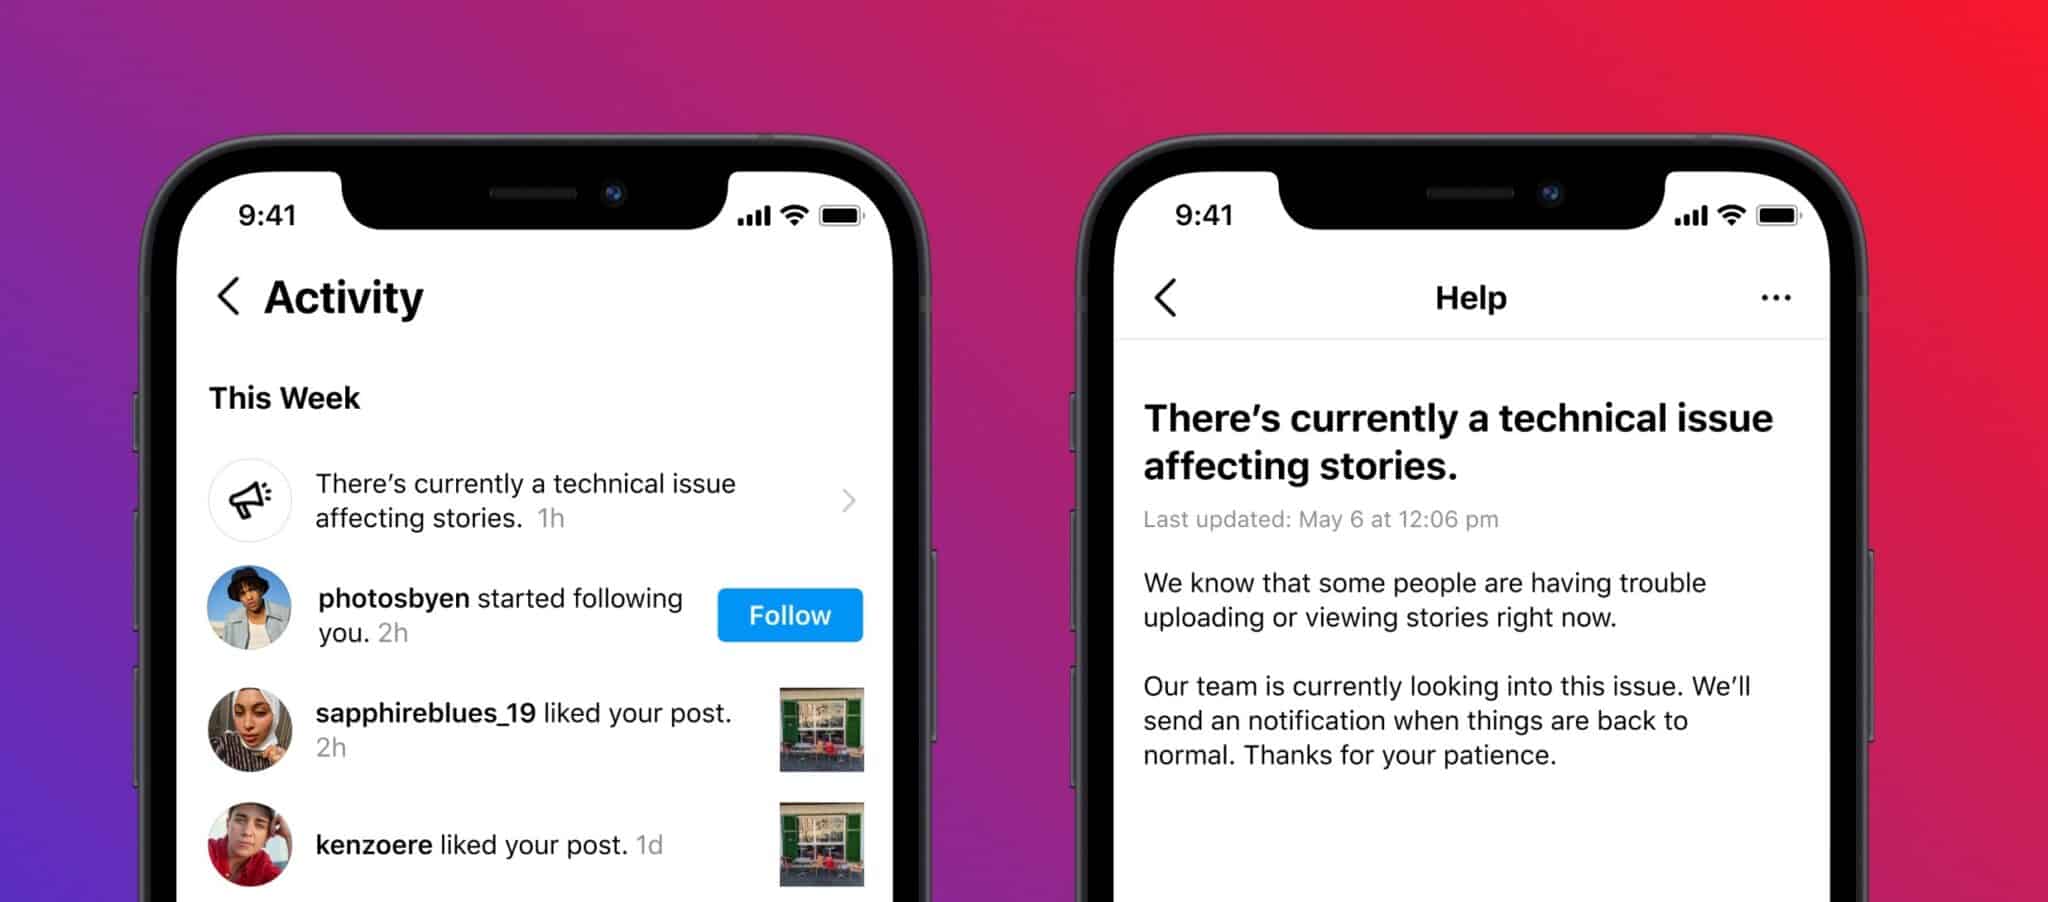 Instagram "There's currently a technical issue affecting stories" error message